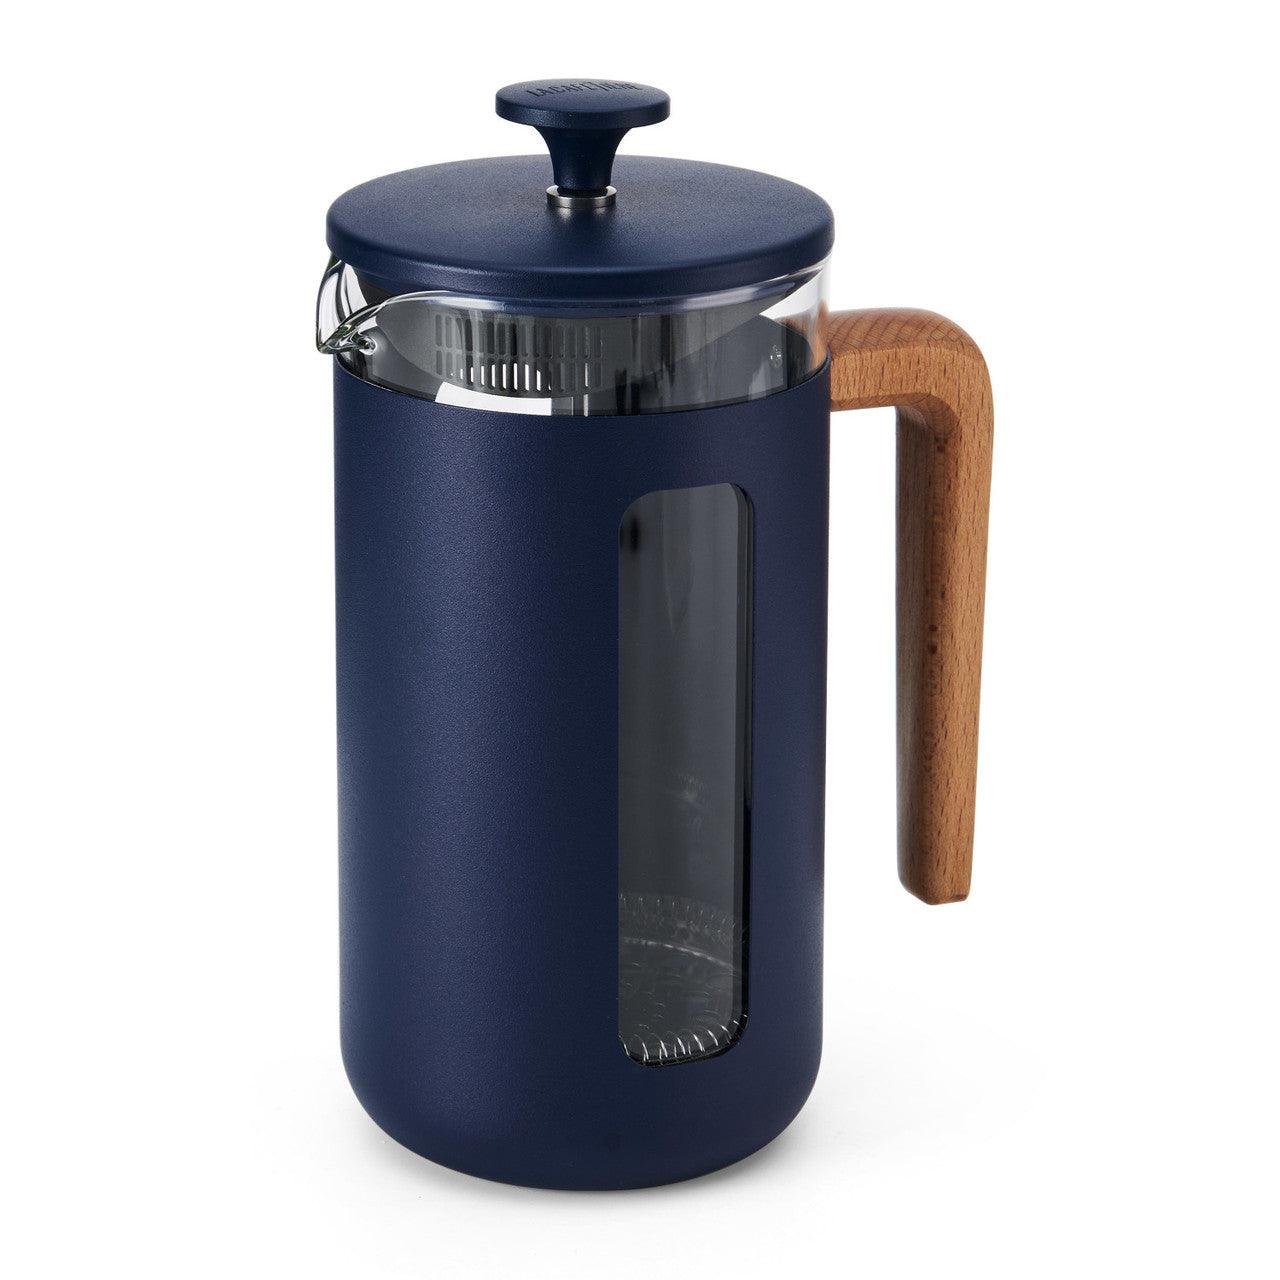 La Cafetière Pisa 8-Cup Cafetiere, Navy - RUTHERFORD & Co